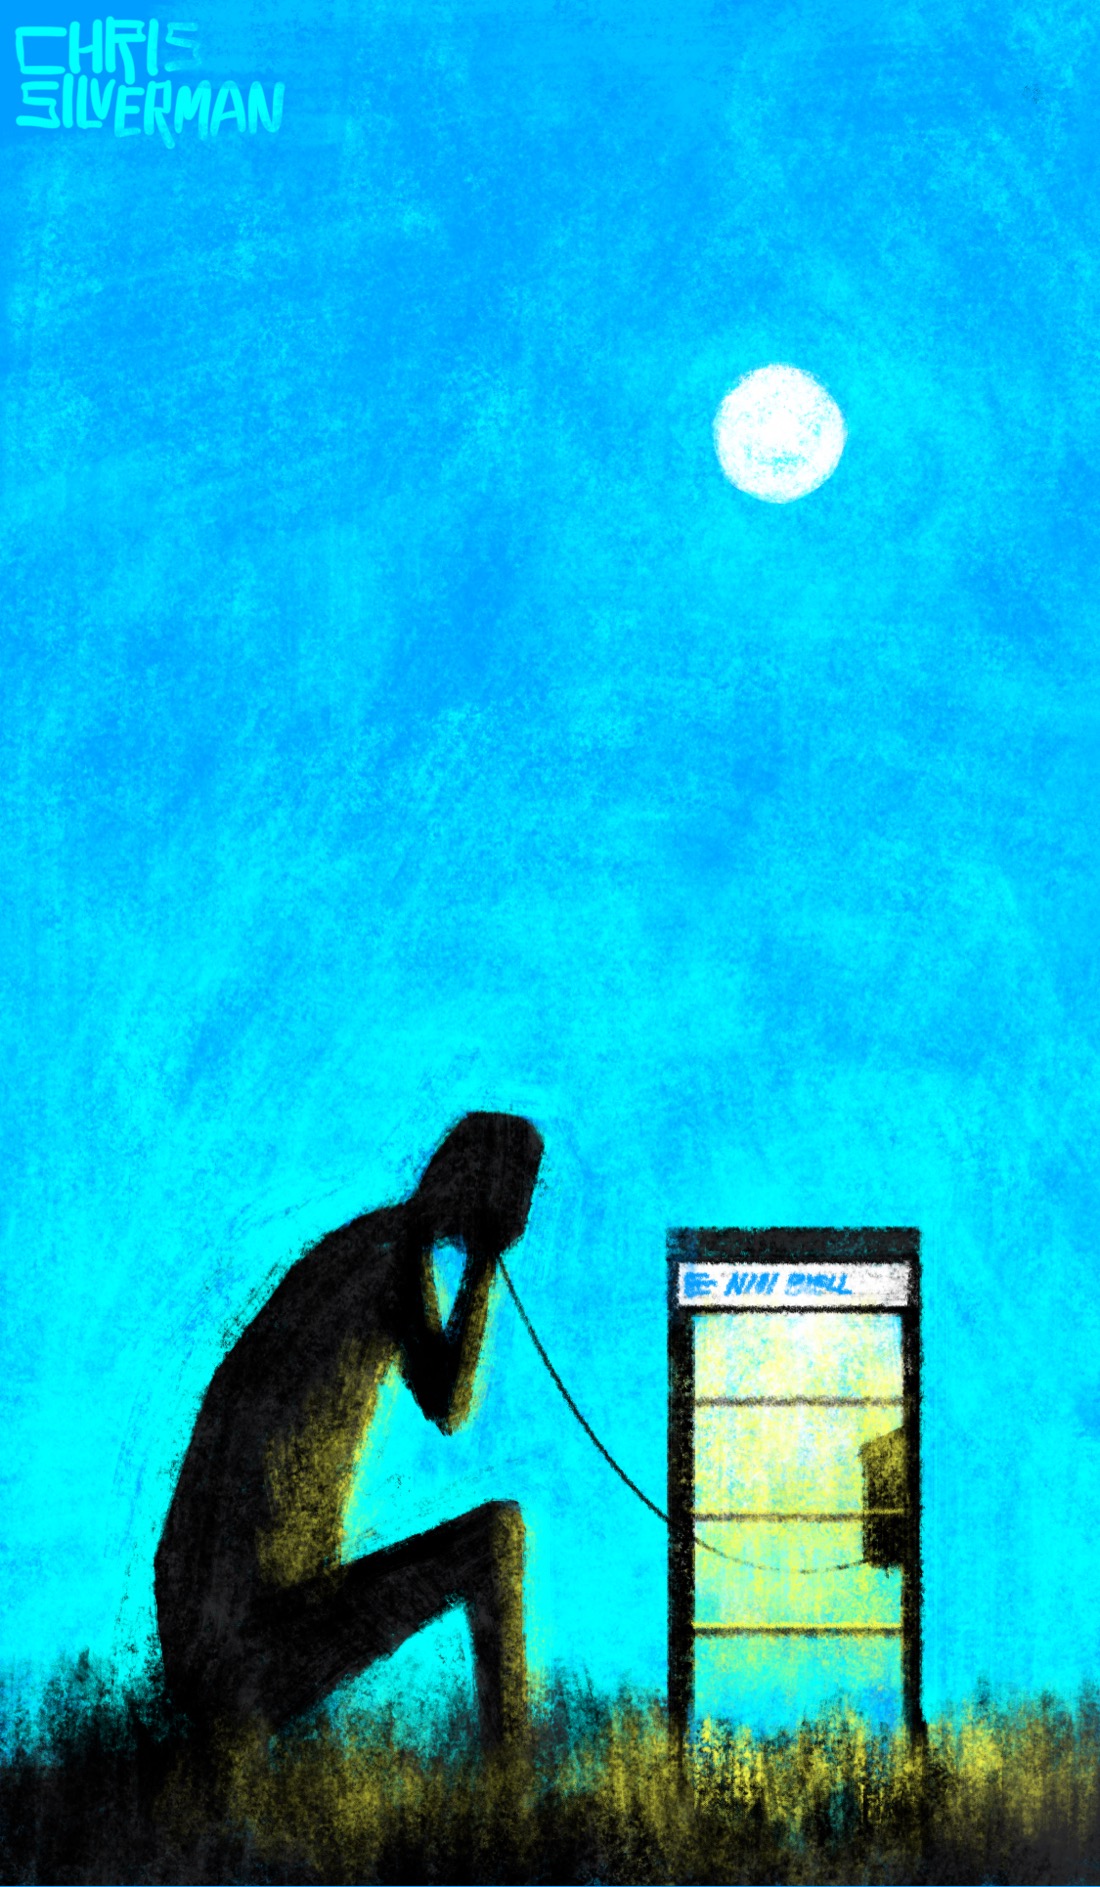 A very large person sitting next to what is presumably a normal-sized phone booth. The booth looks like it's in a meadow in the middle of nowhere. The person would probably be twice the size of the booth if they were standing up. They are nevertheless using the phone, stretching the cord outside the booth. It looks like early morning or early evening; the sky is a darkening blue, and the yellow light from the booth illuminates the grass around it. The person is just a dark silhouette, with no facial features visible. A full moon sits high in the sky.